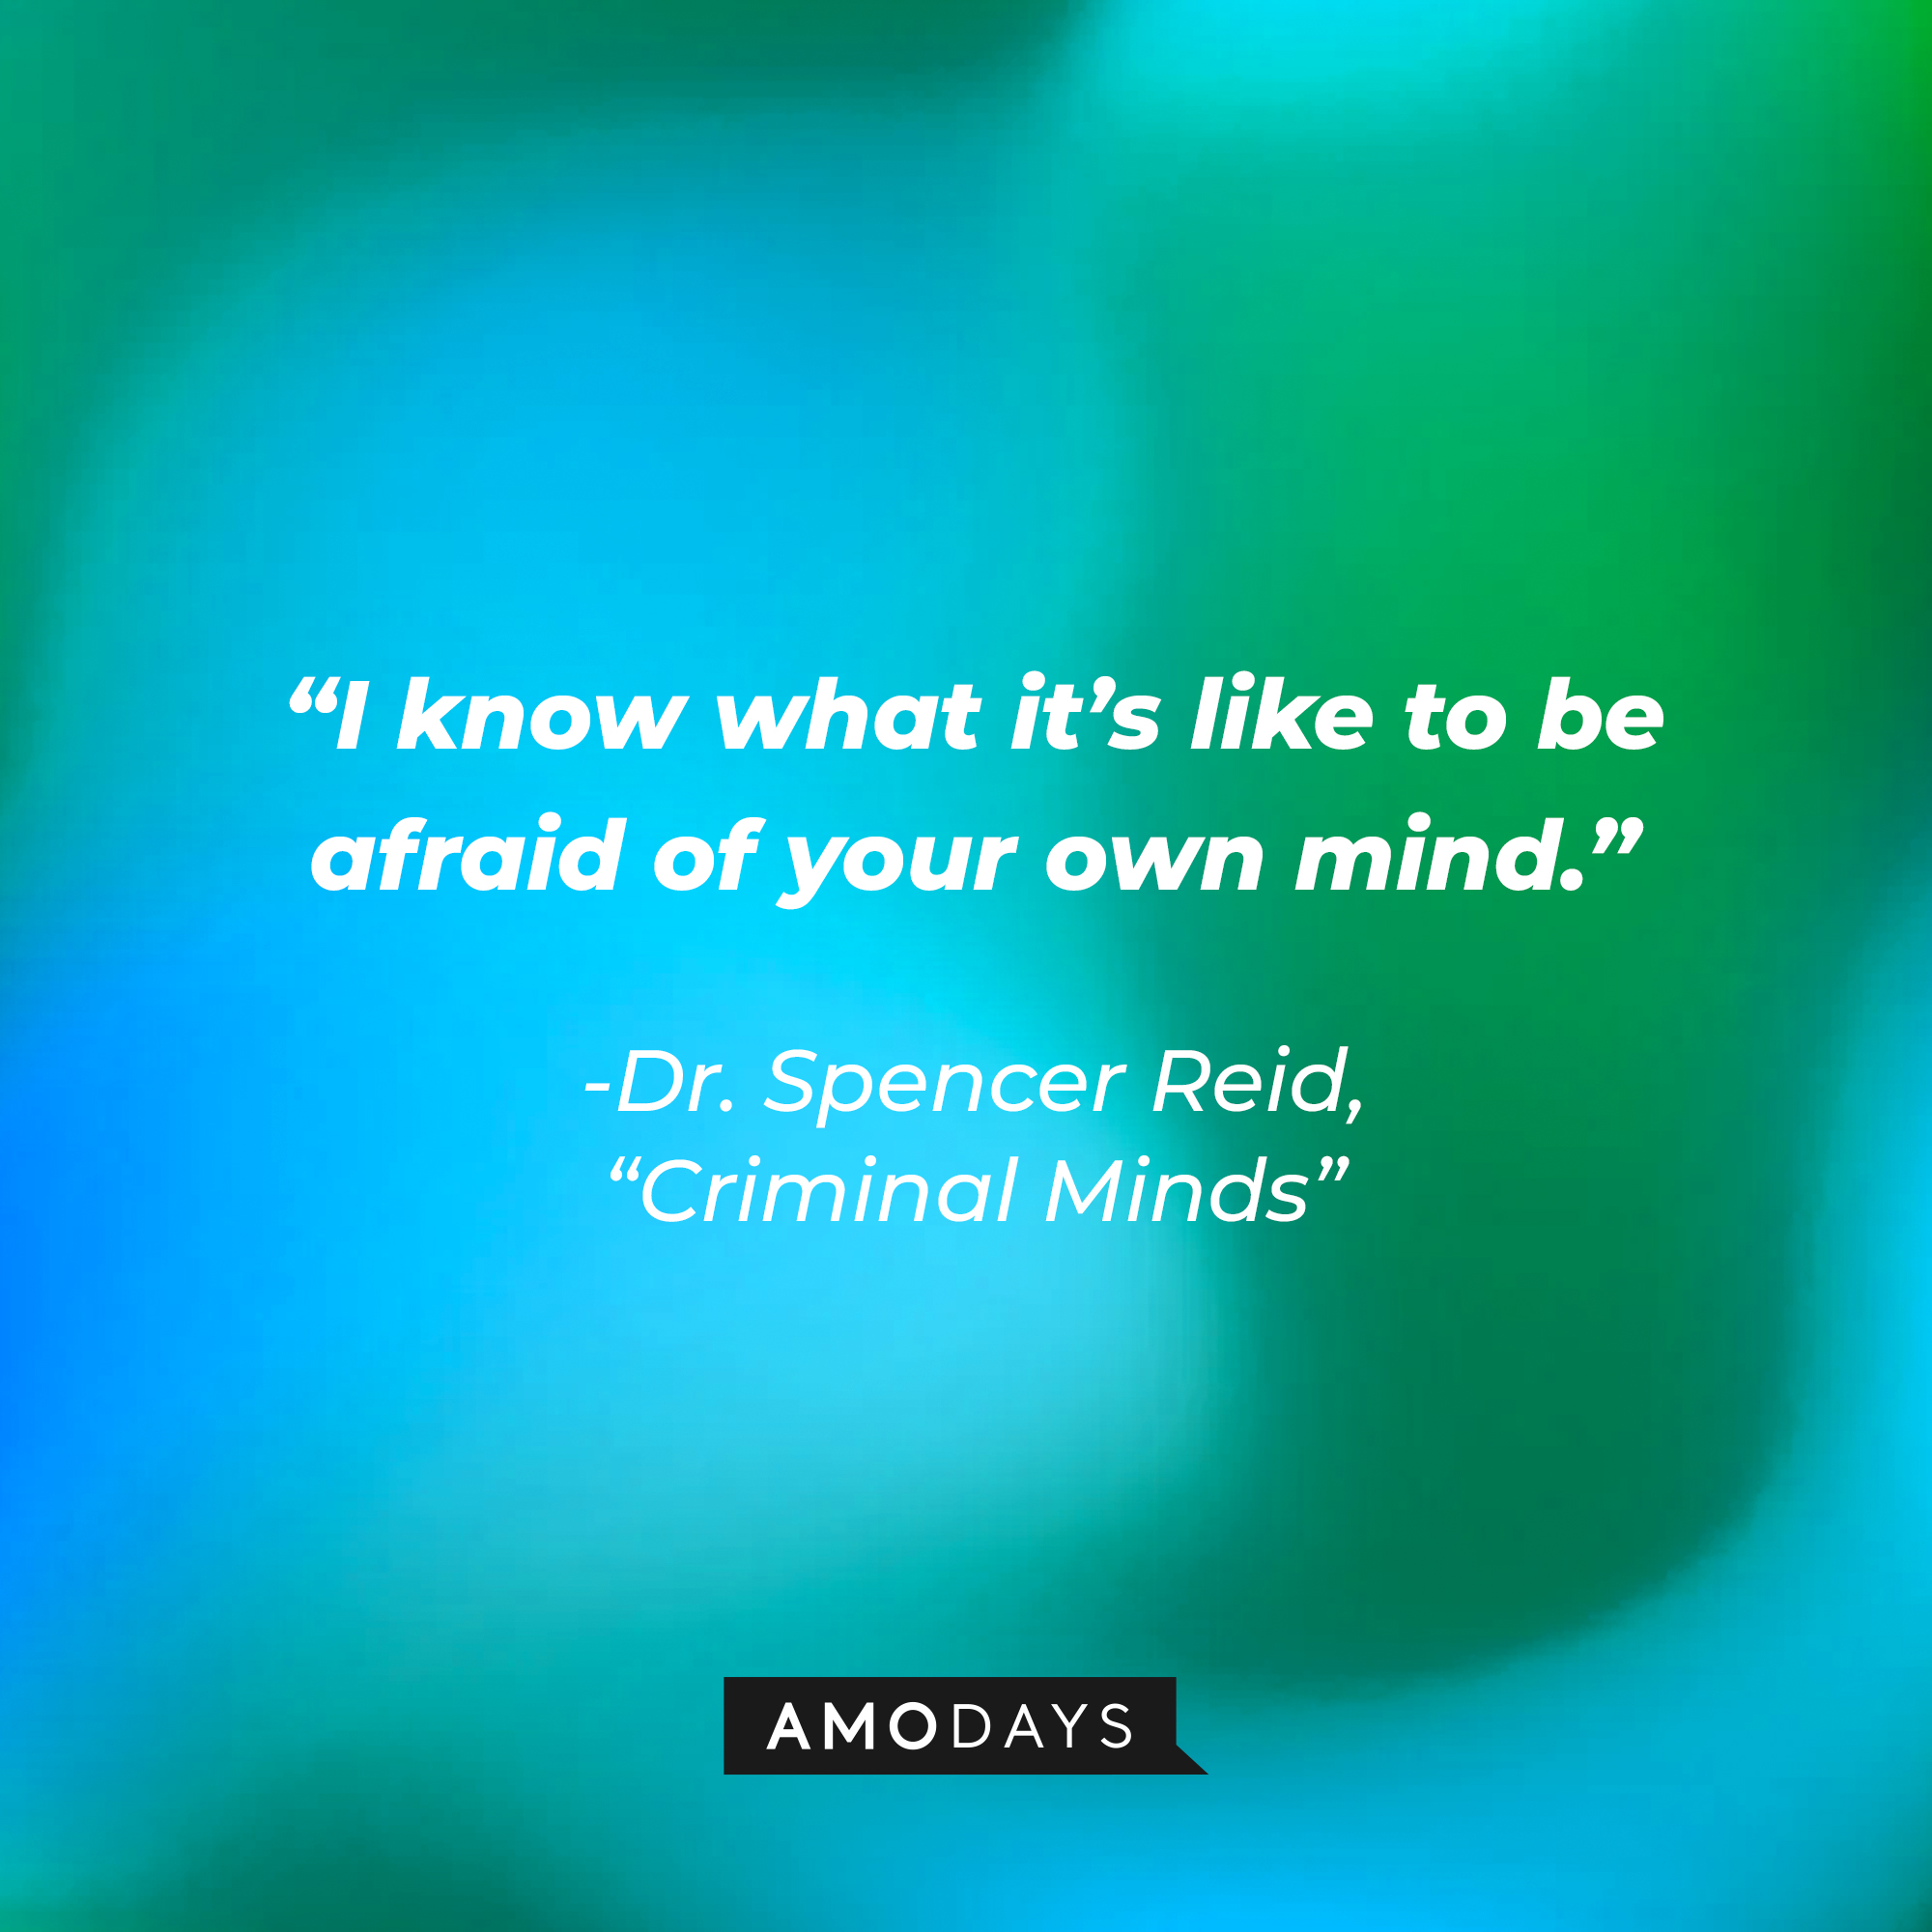 Dr. Spencer Reid's quote: “I know what it’s like to be afraid of your own mind.” | Source: Amodays